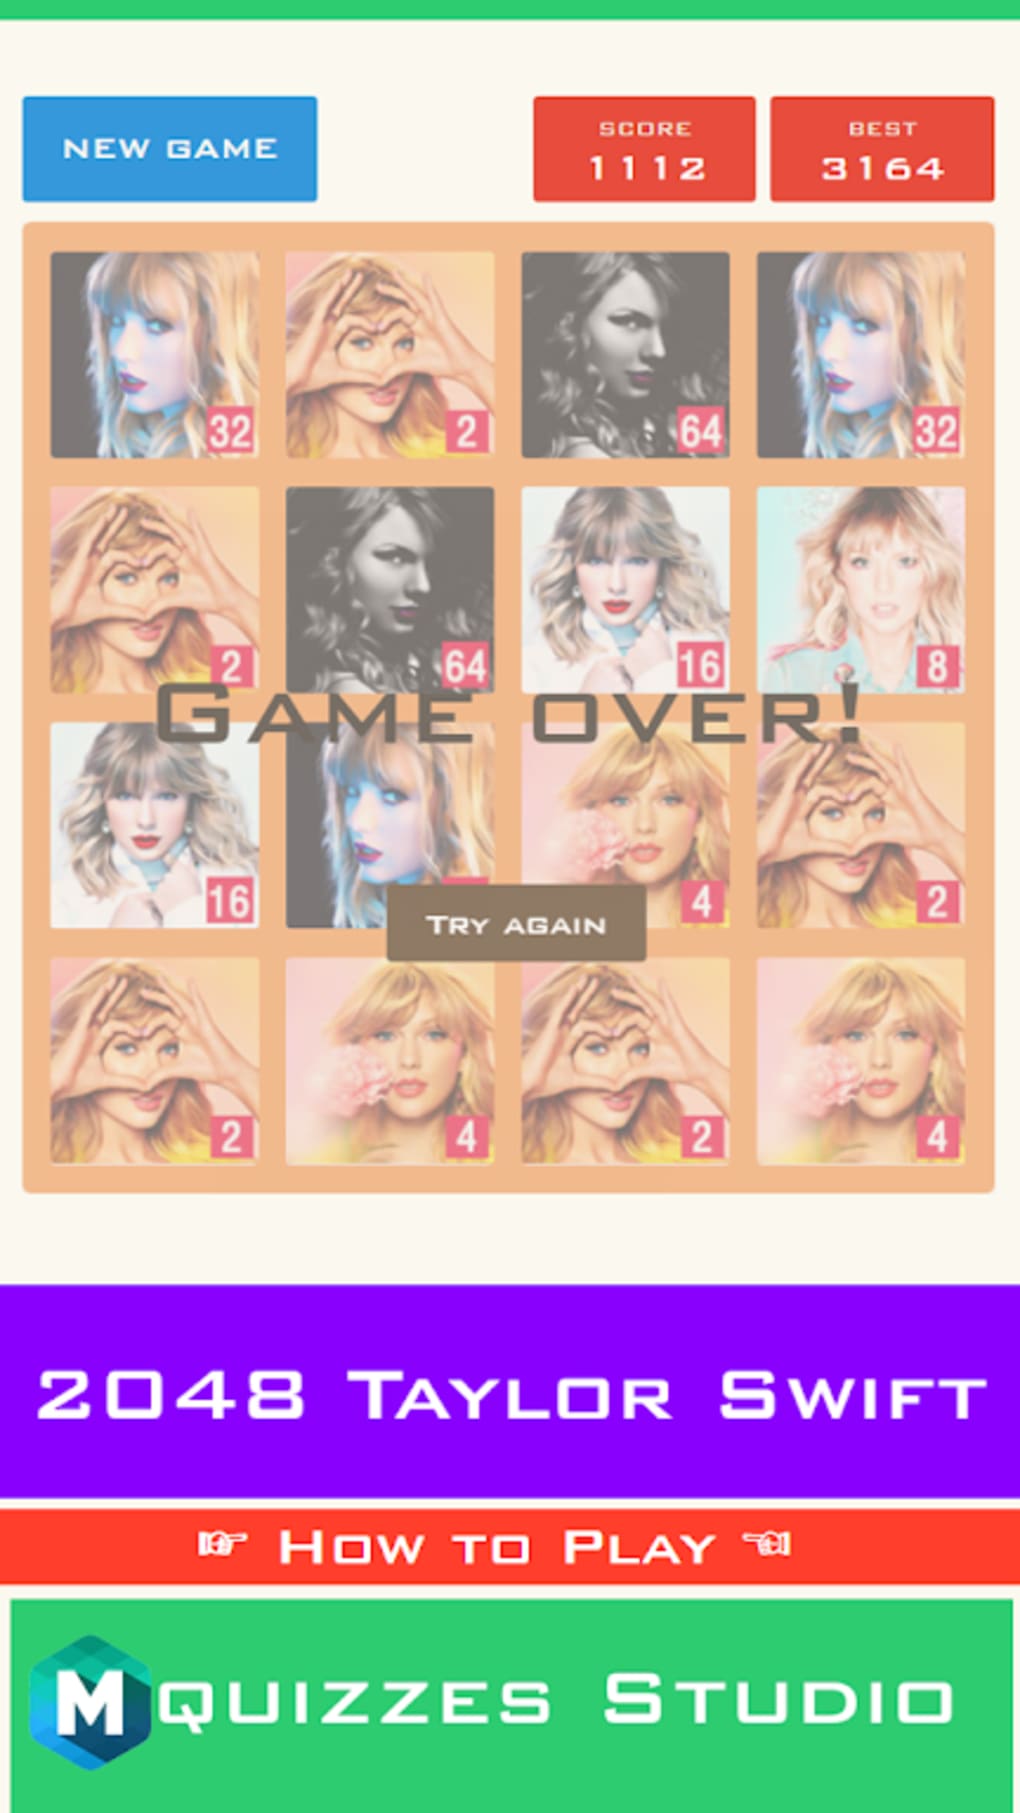 How to beat Taylor swift 2048?